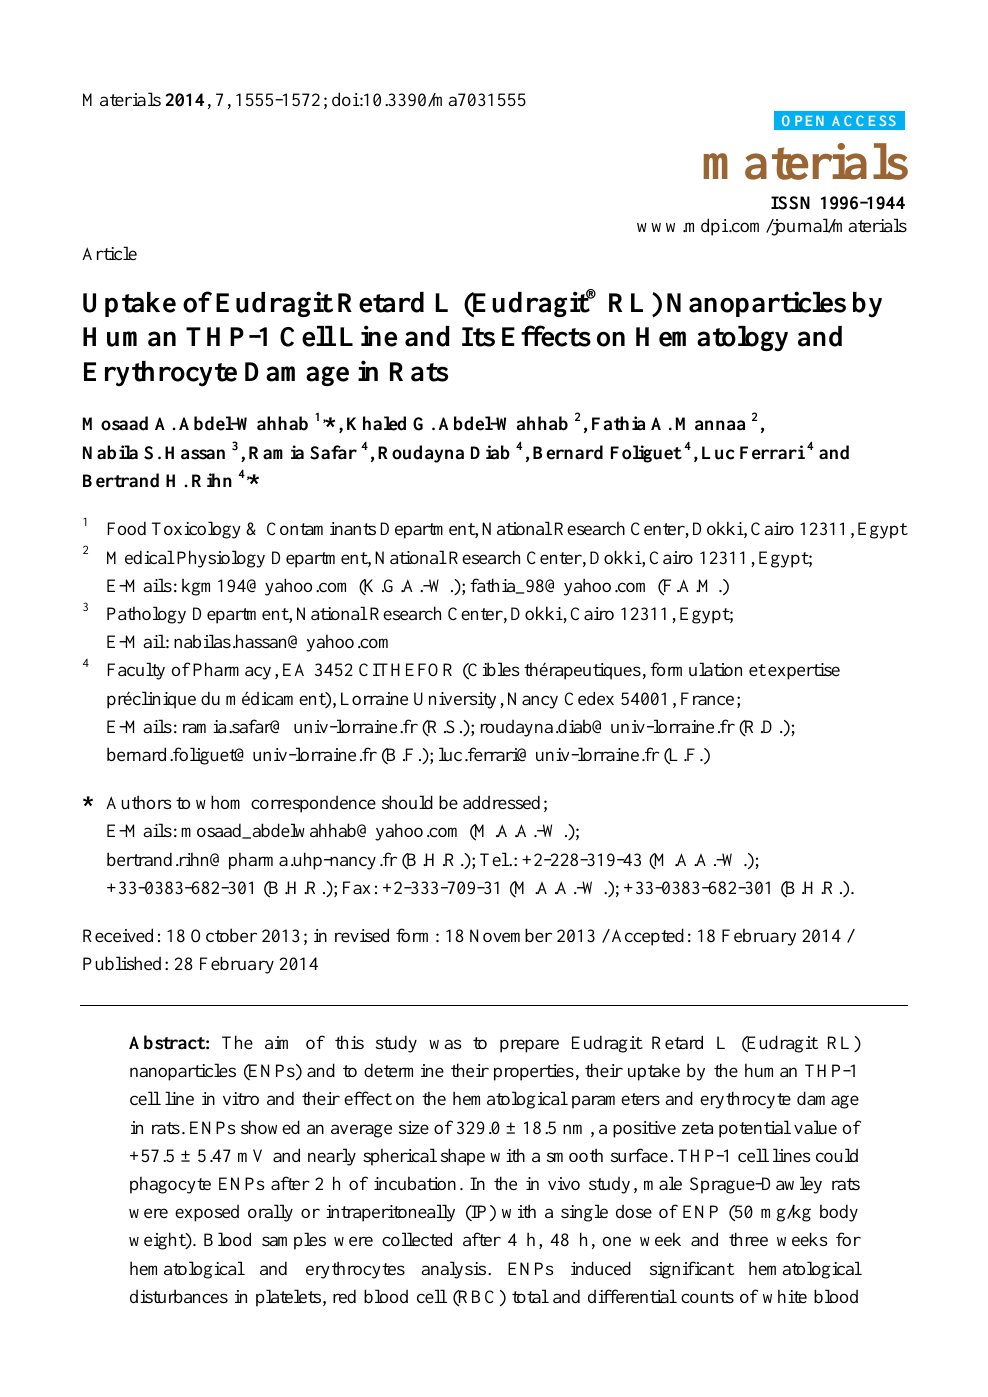 Uptake Of Eudragit Retard L Eudragit Rl Nanoparticles By Human Thp 1 Cell Line And Its Effects On Hematology And Erythrocyte Damage In Rats Topic Of Research Paper In Chemical Sciences Download